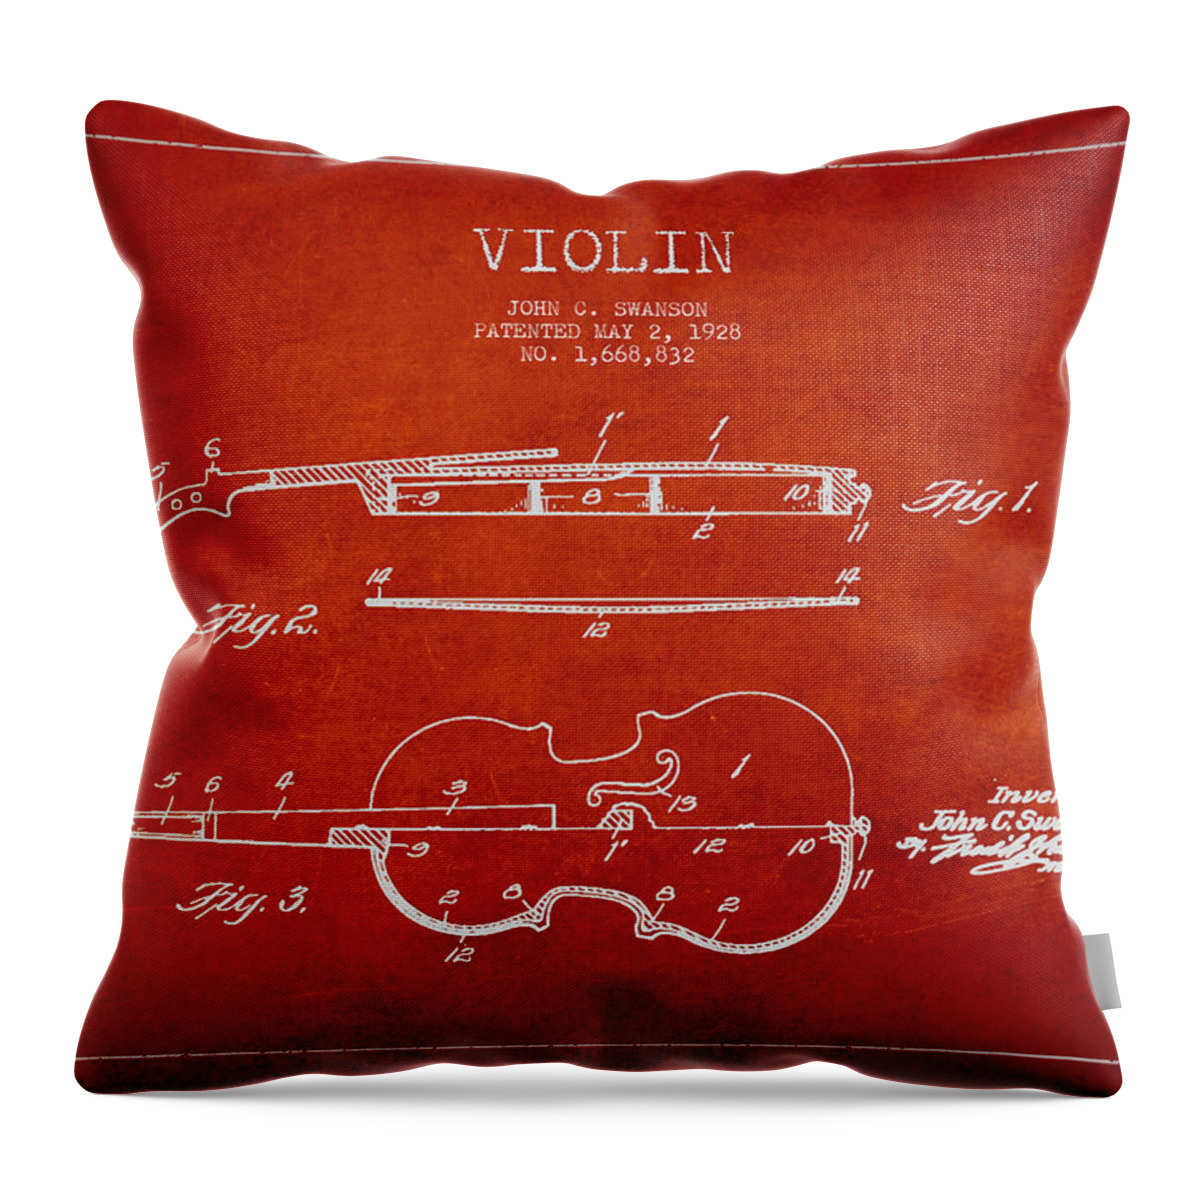 Violin Throw Pillow featuring the digital art Vintage Violin Patent Drawing From 1928 #3 by Aged Pixel